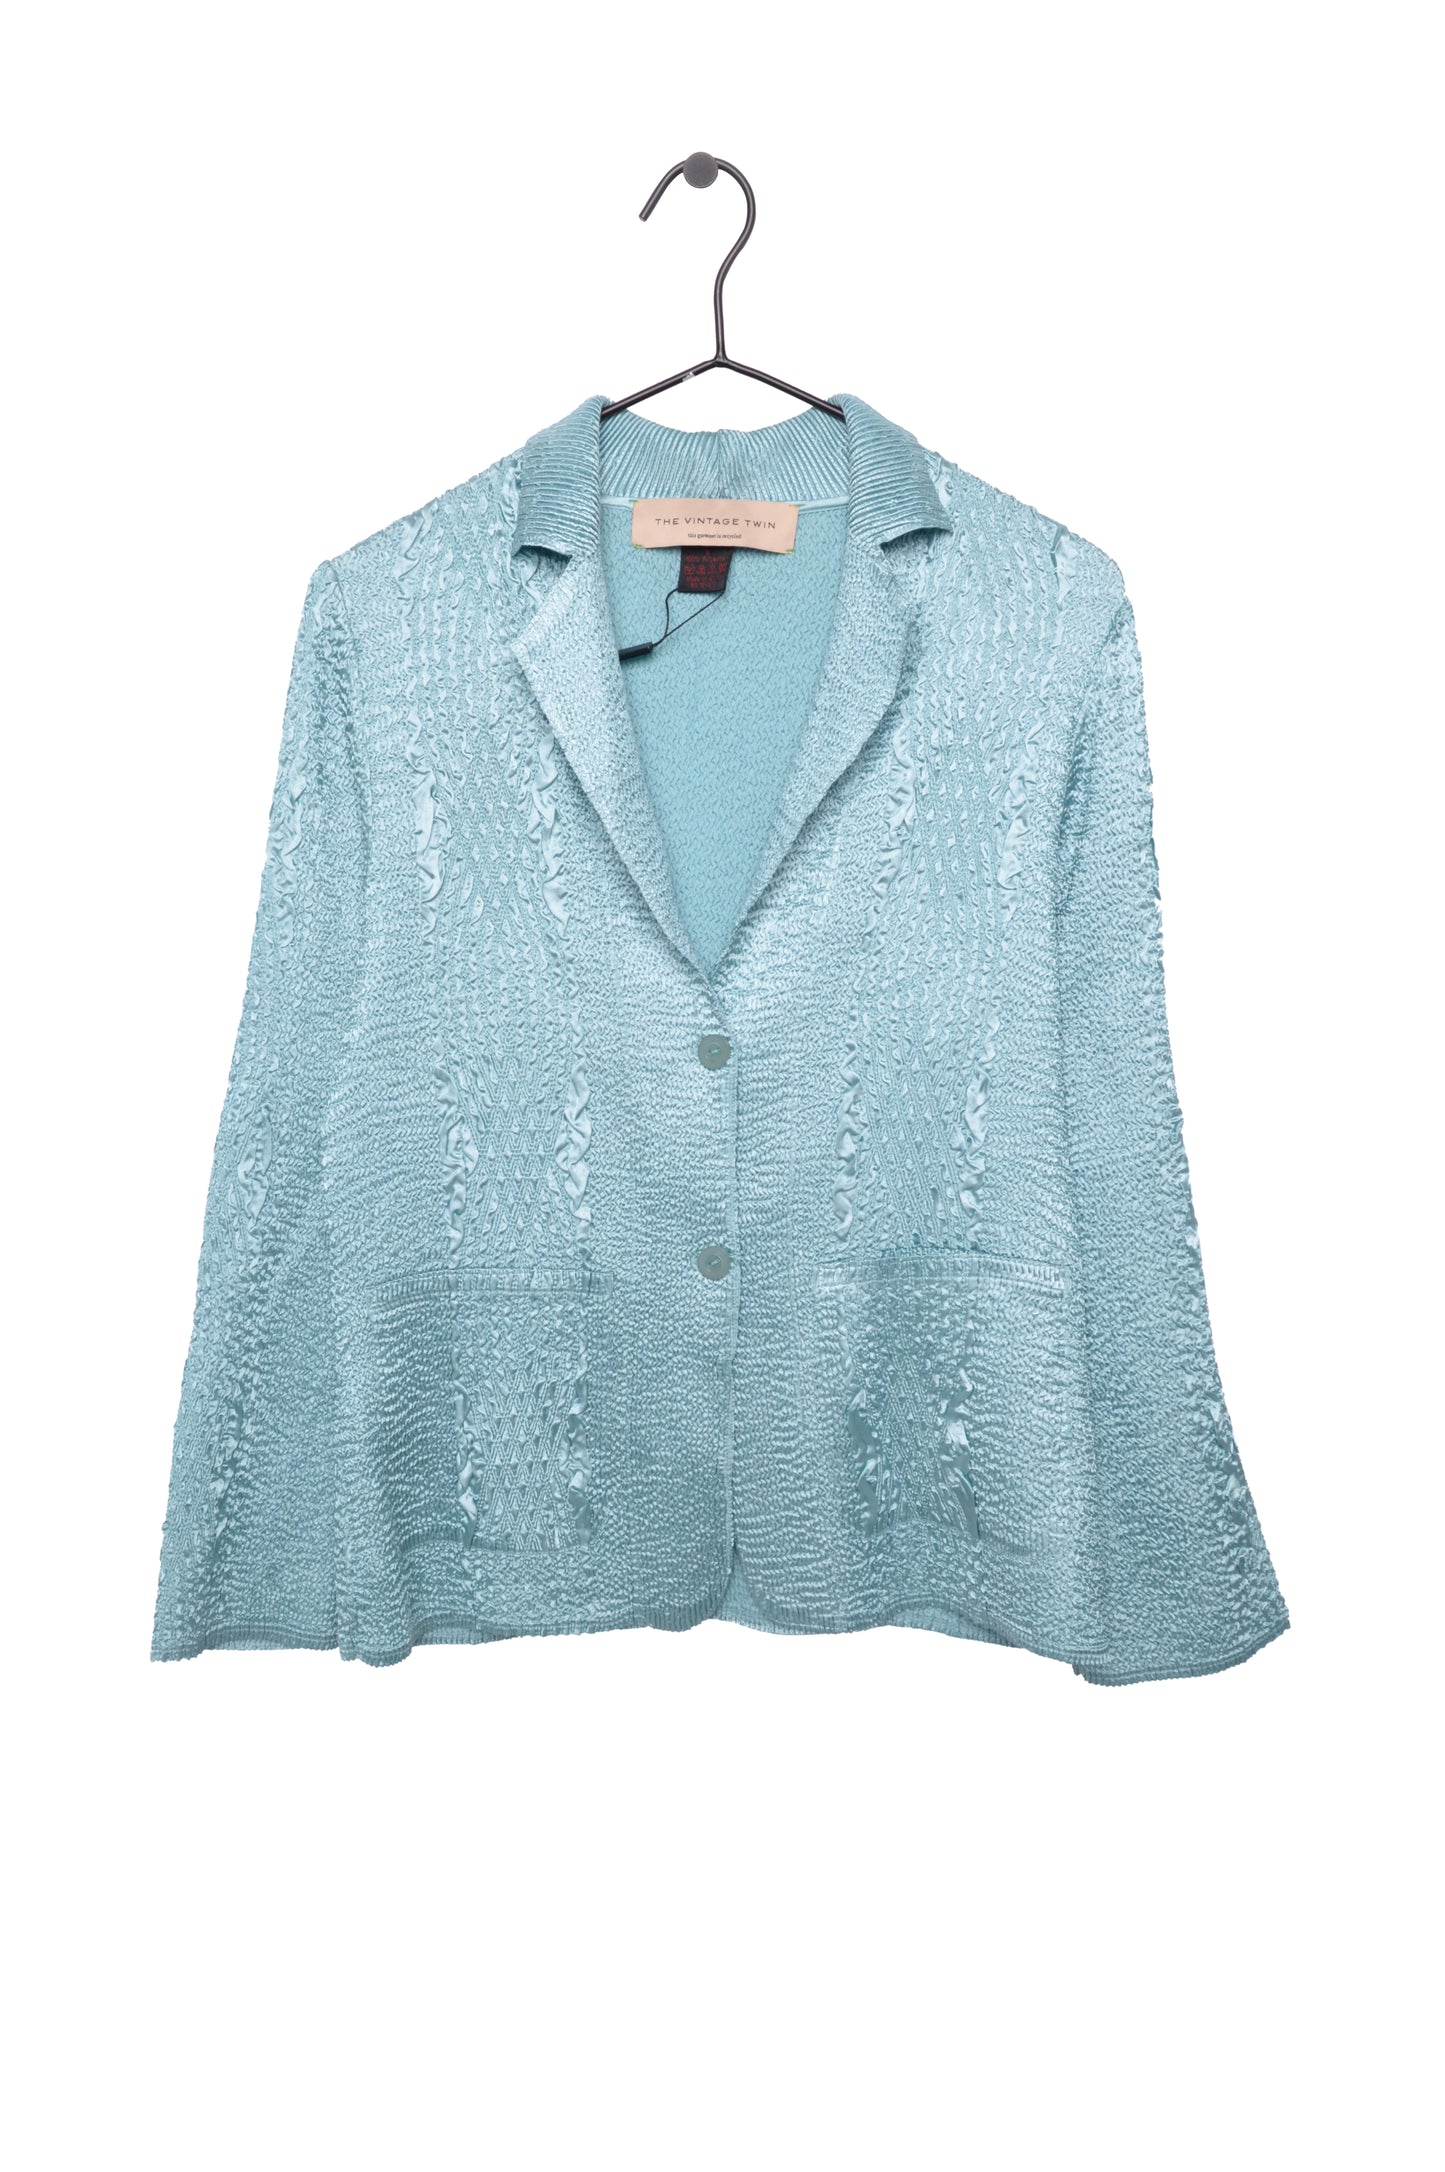 Teal Button Popcorn Top